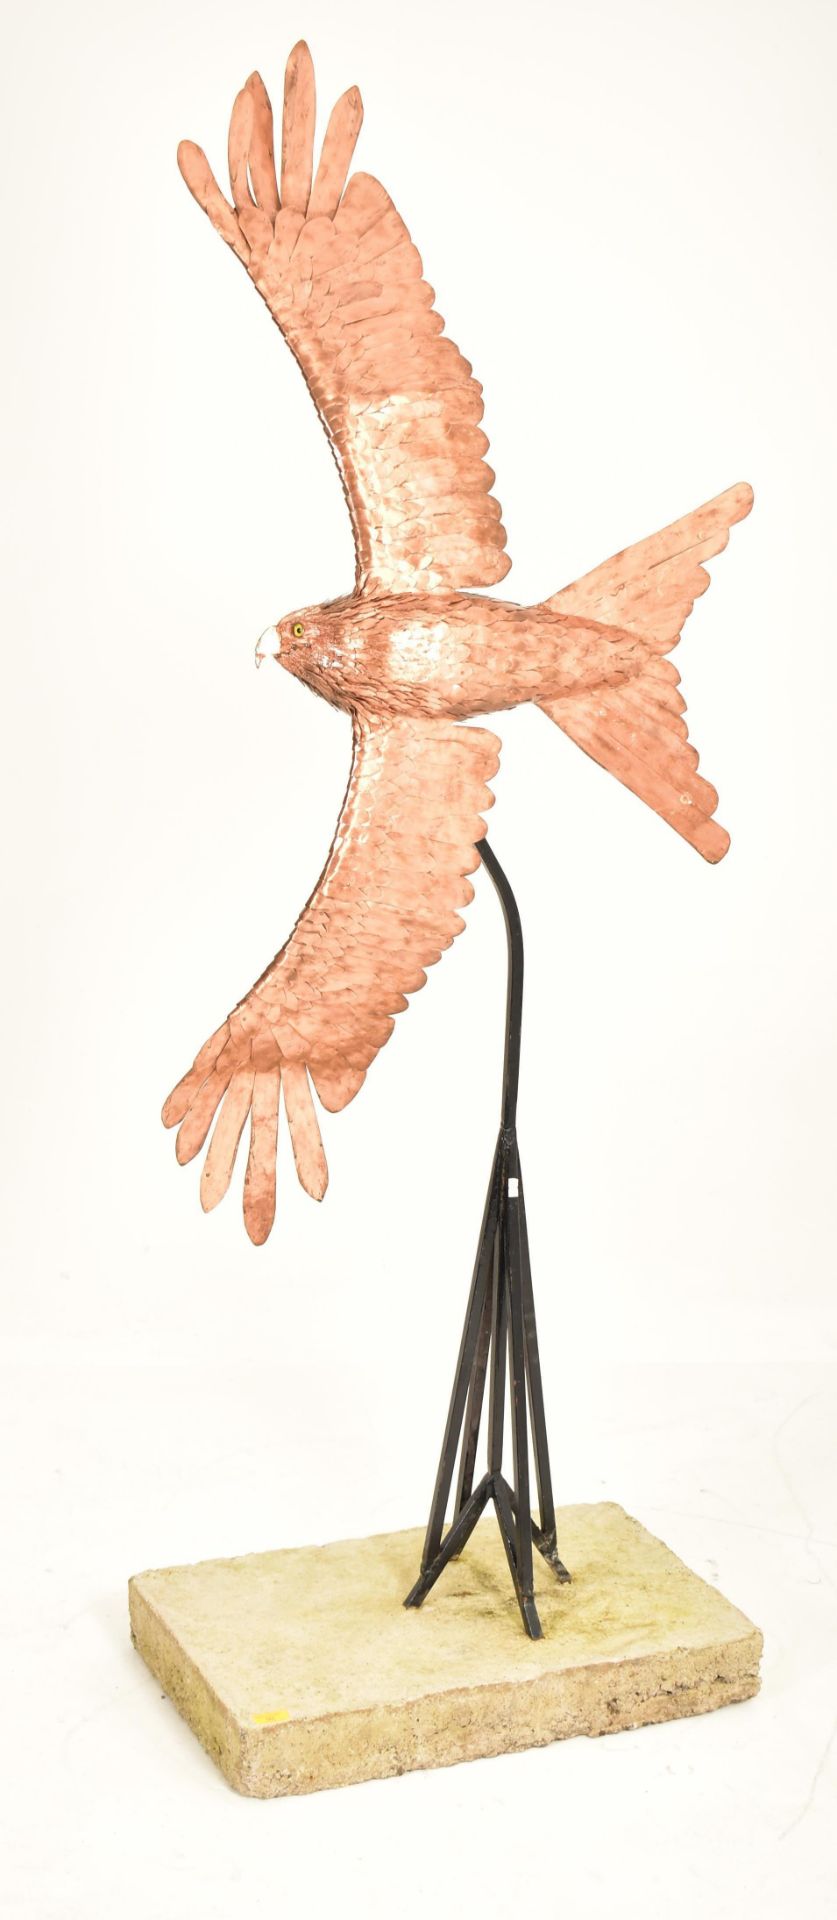 BOB ROWLEY - CONTEMPORARY COPPER WORKED RED KITE SCULPTURE - Image 3 of 6